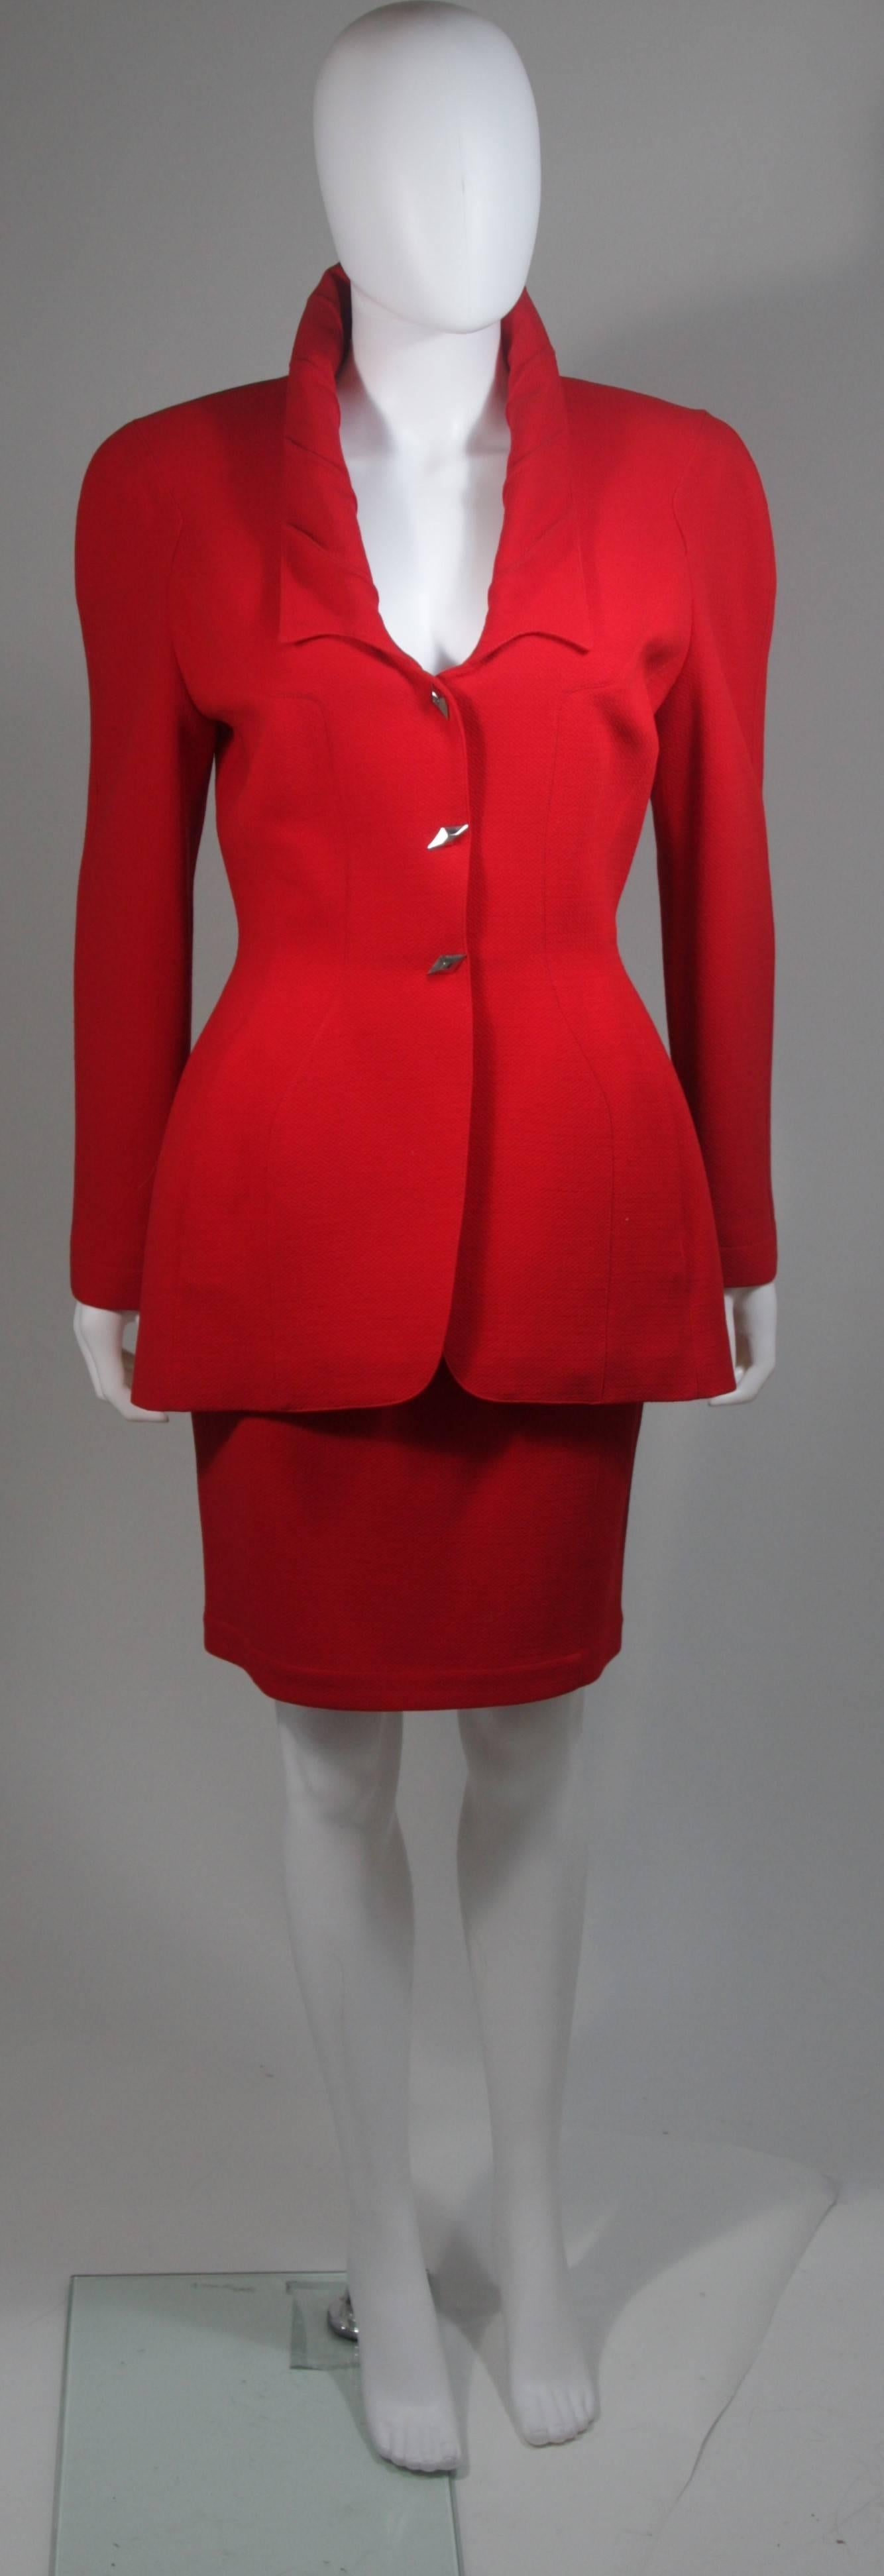  This skirt suit is composed of red fabric. The jacket has center front closures with silver hardware. The skirt has a classic pencil silhouette with zipper closure. In excellent vintage condition. Made in France. 

  **Please cross-reference